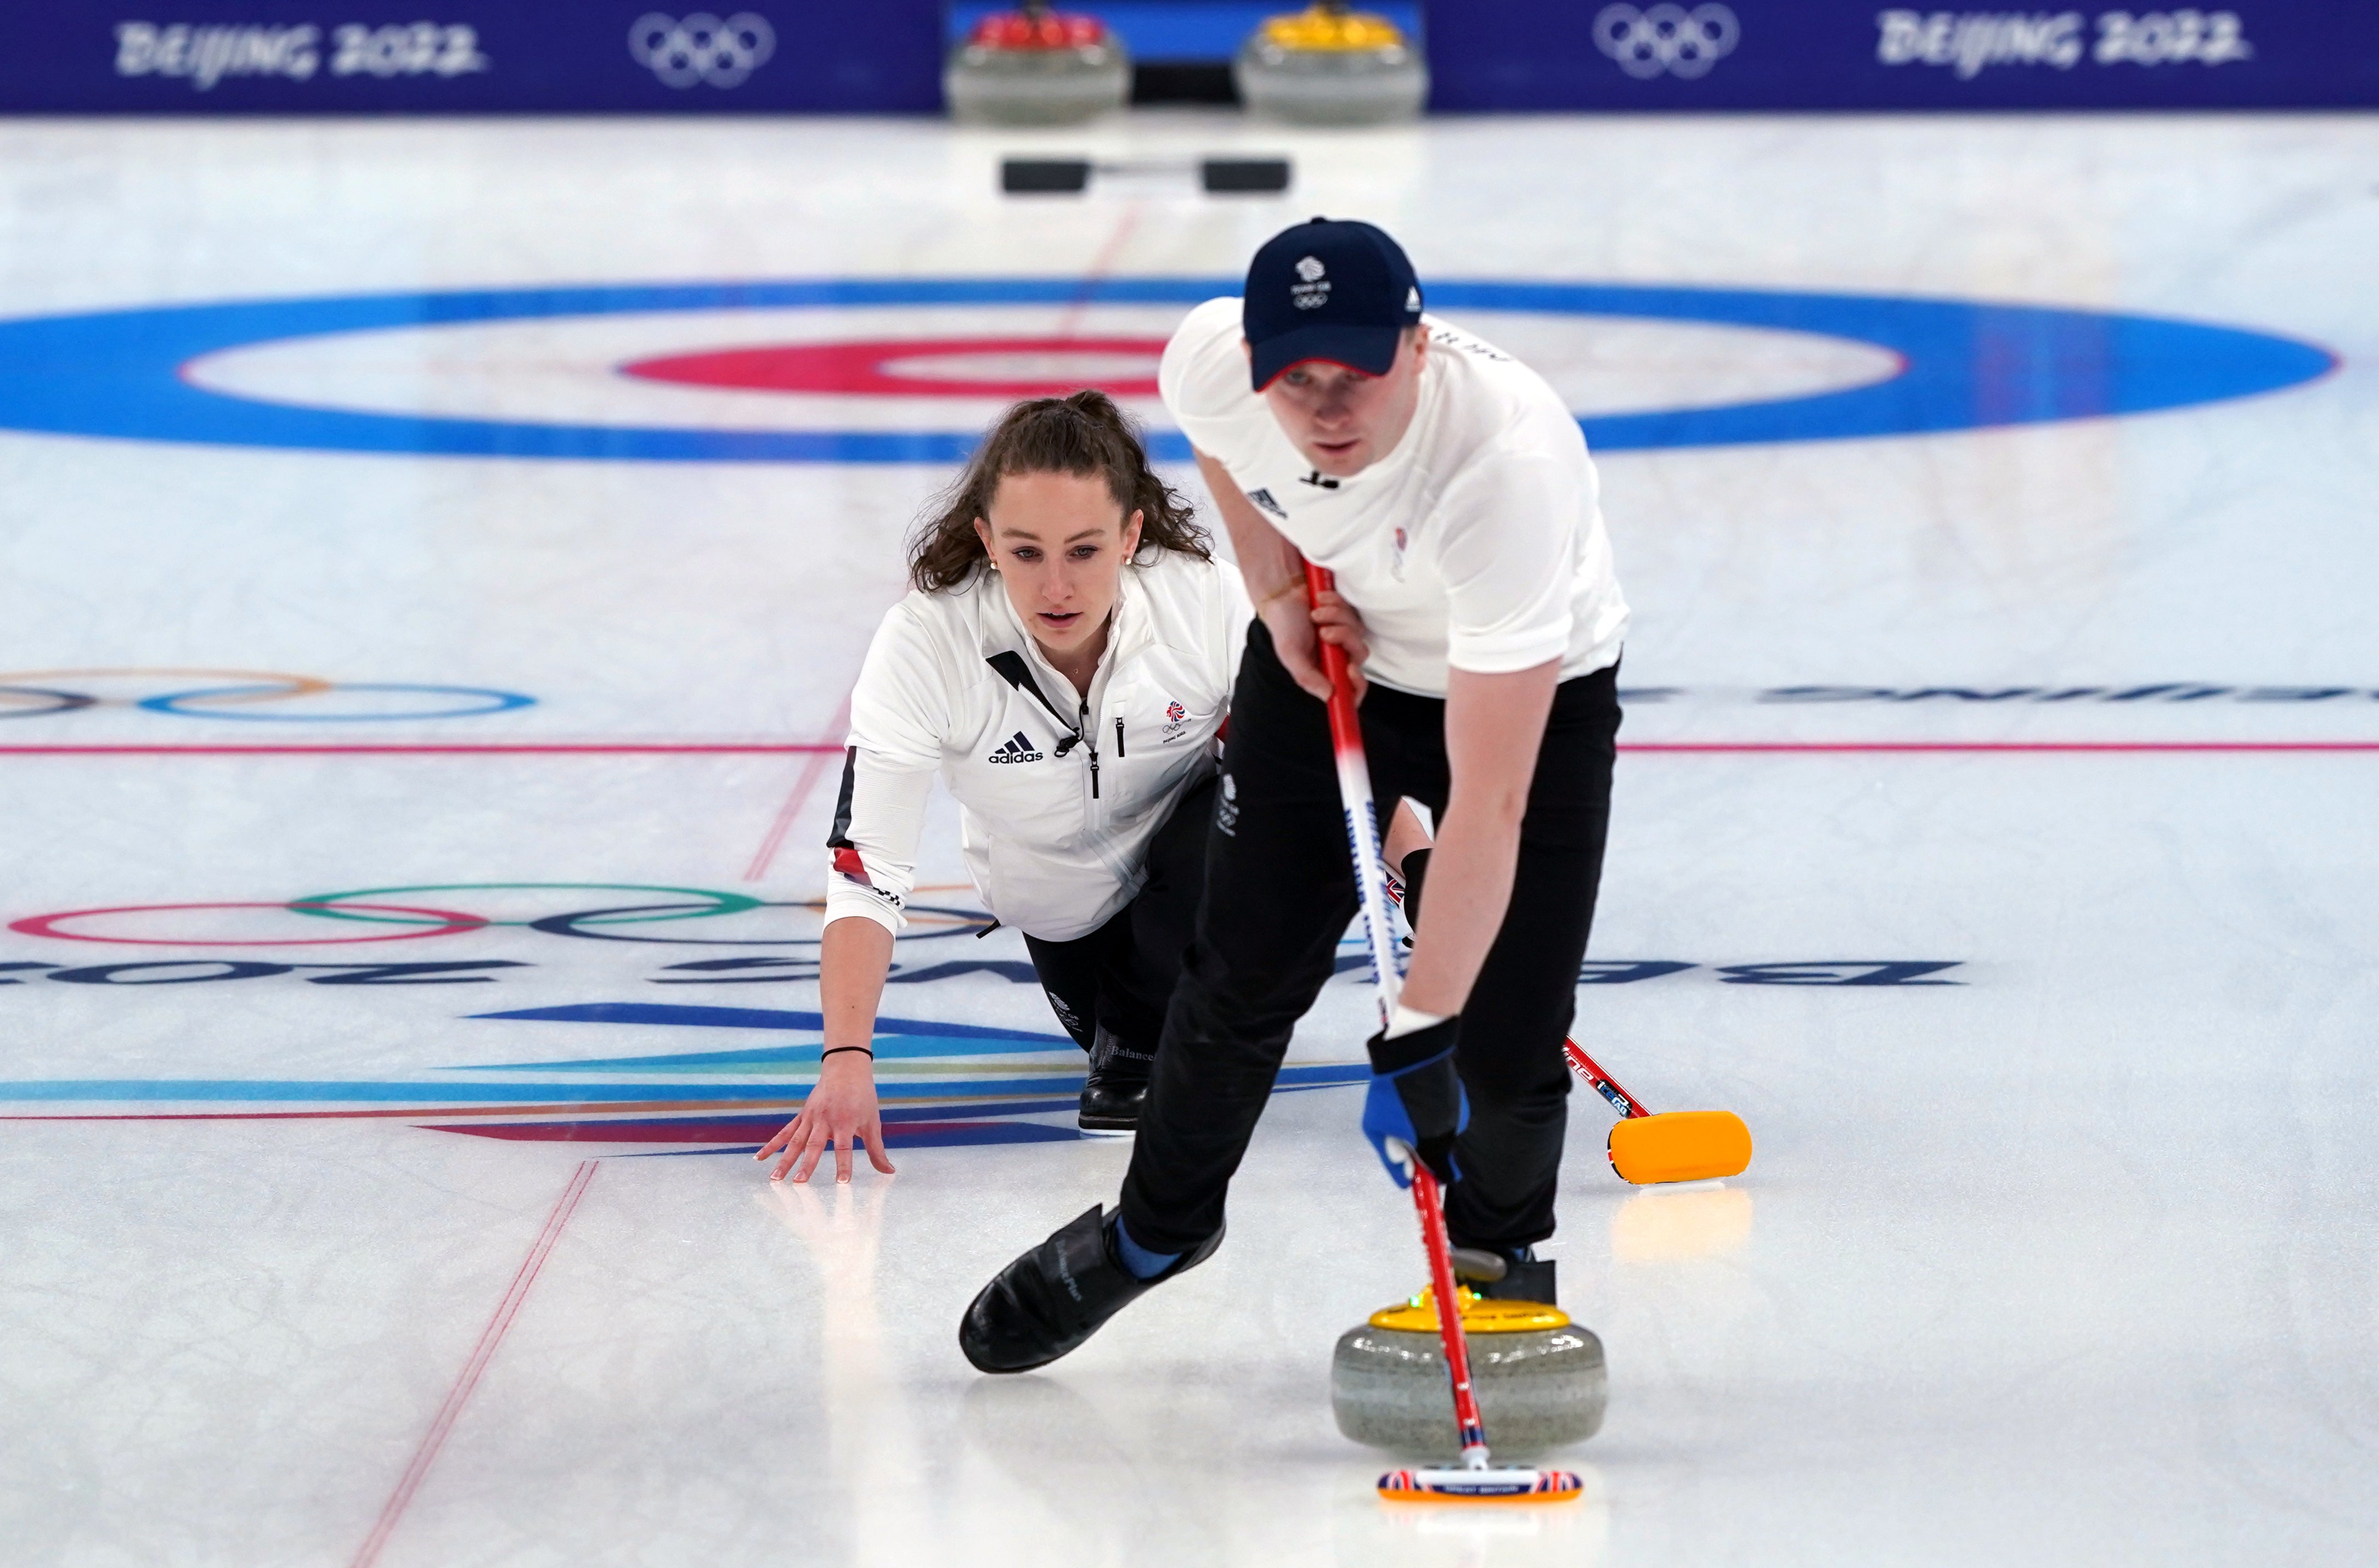 Today at the Winter Olympics Great Britains mixed curlers one more win off semi-final spot The Independent